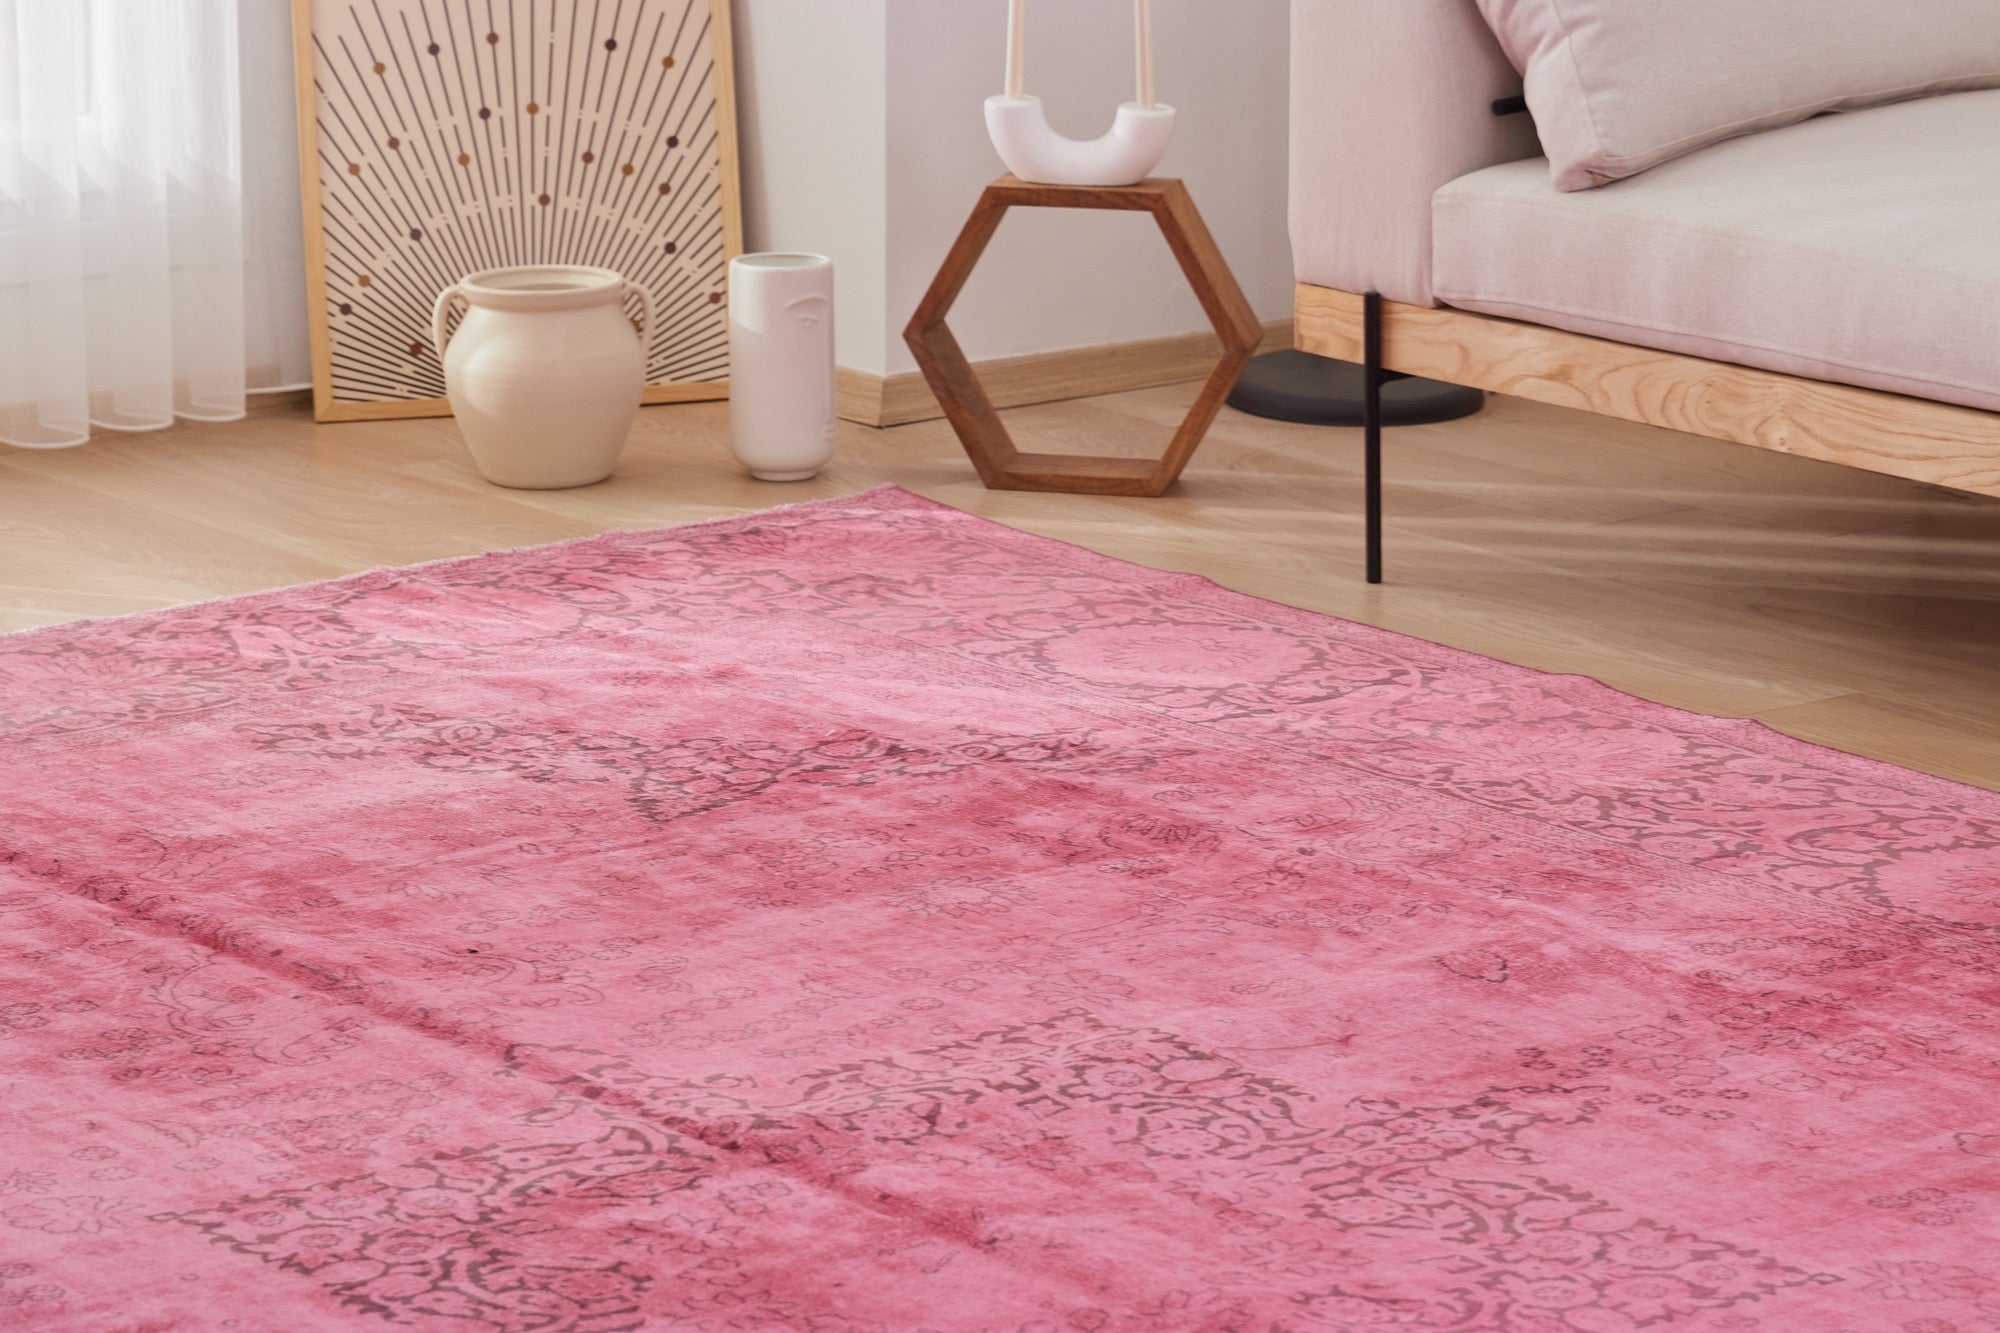 Briella | Timeless Indian Elegance | Unique Large Area Rug | Kuden Rugs